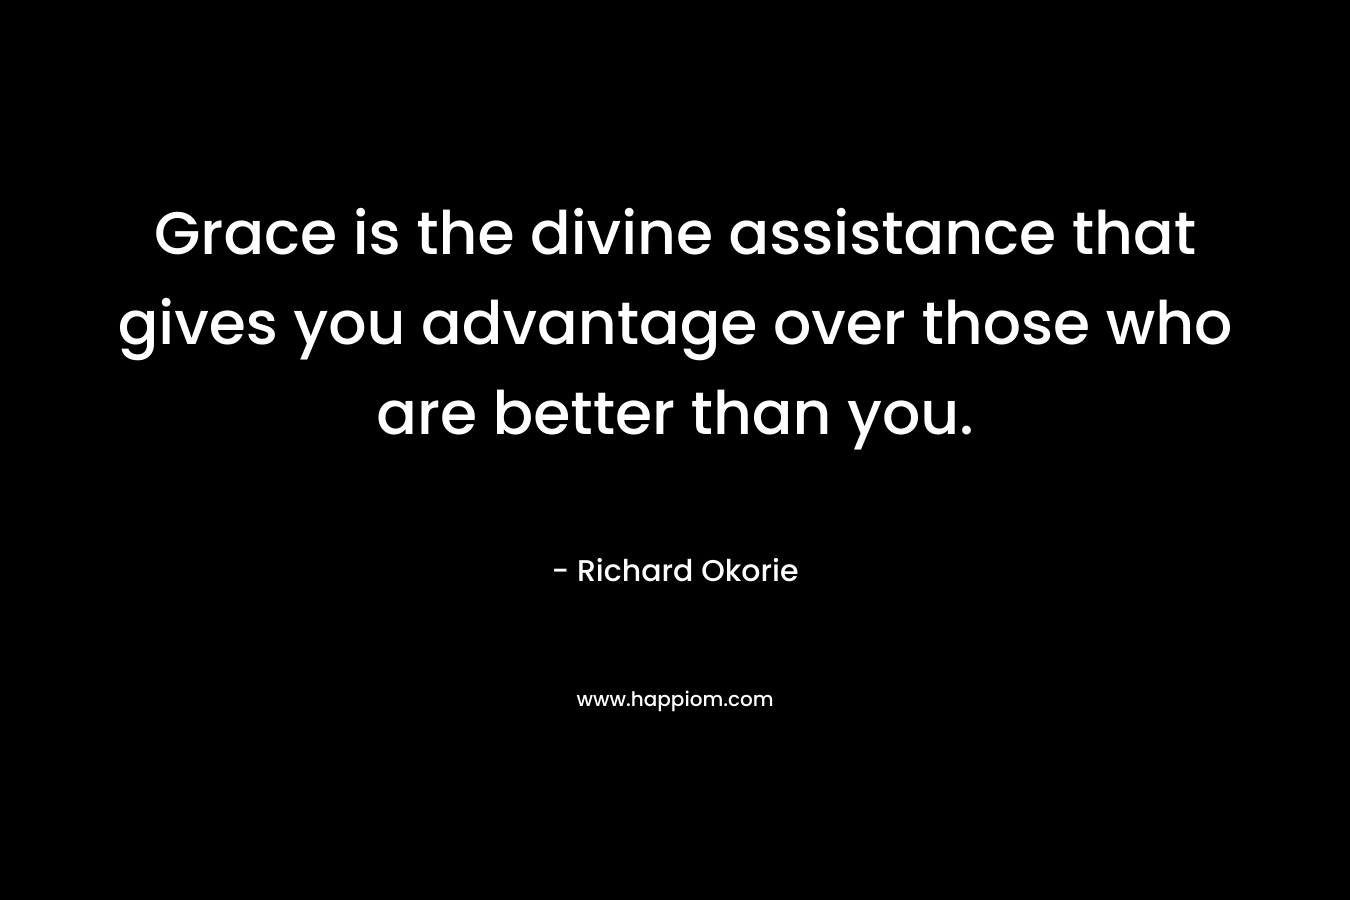 Grace is the divine assistance that gives you advantage over those who are better than you.